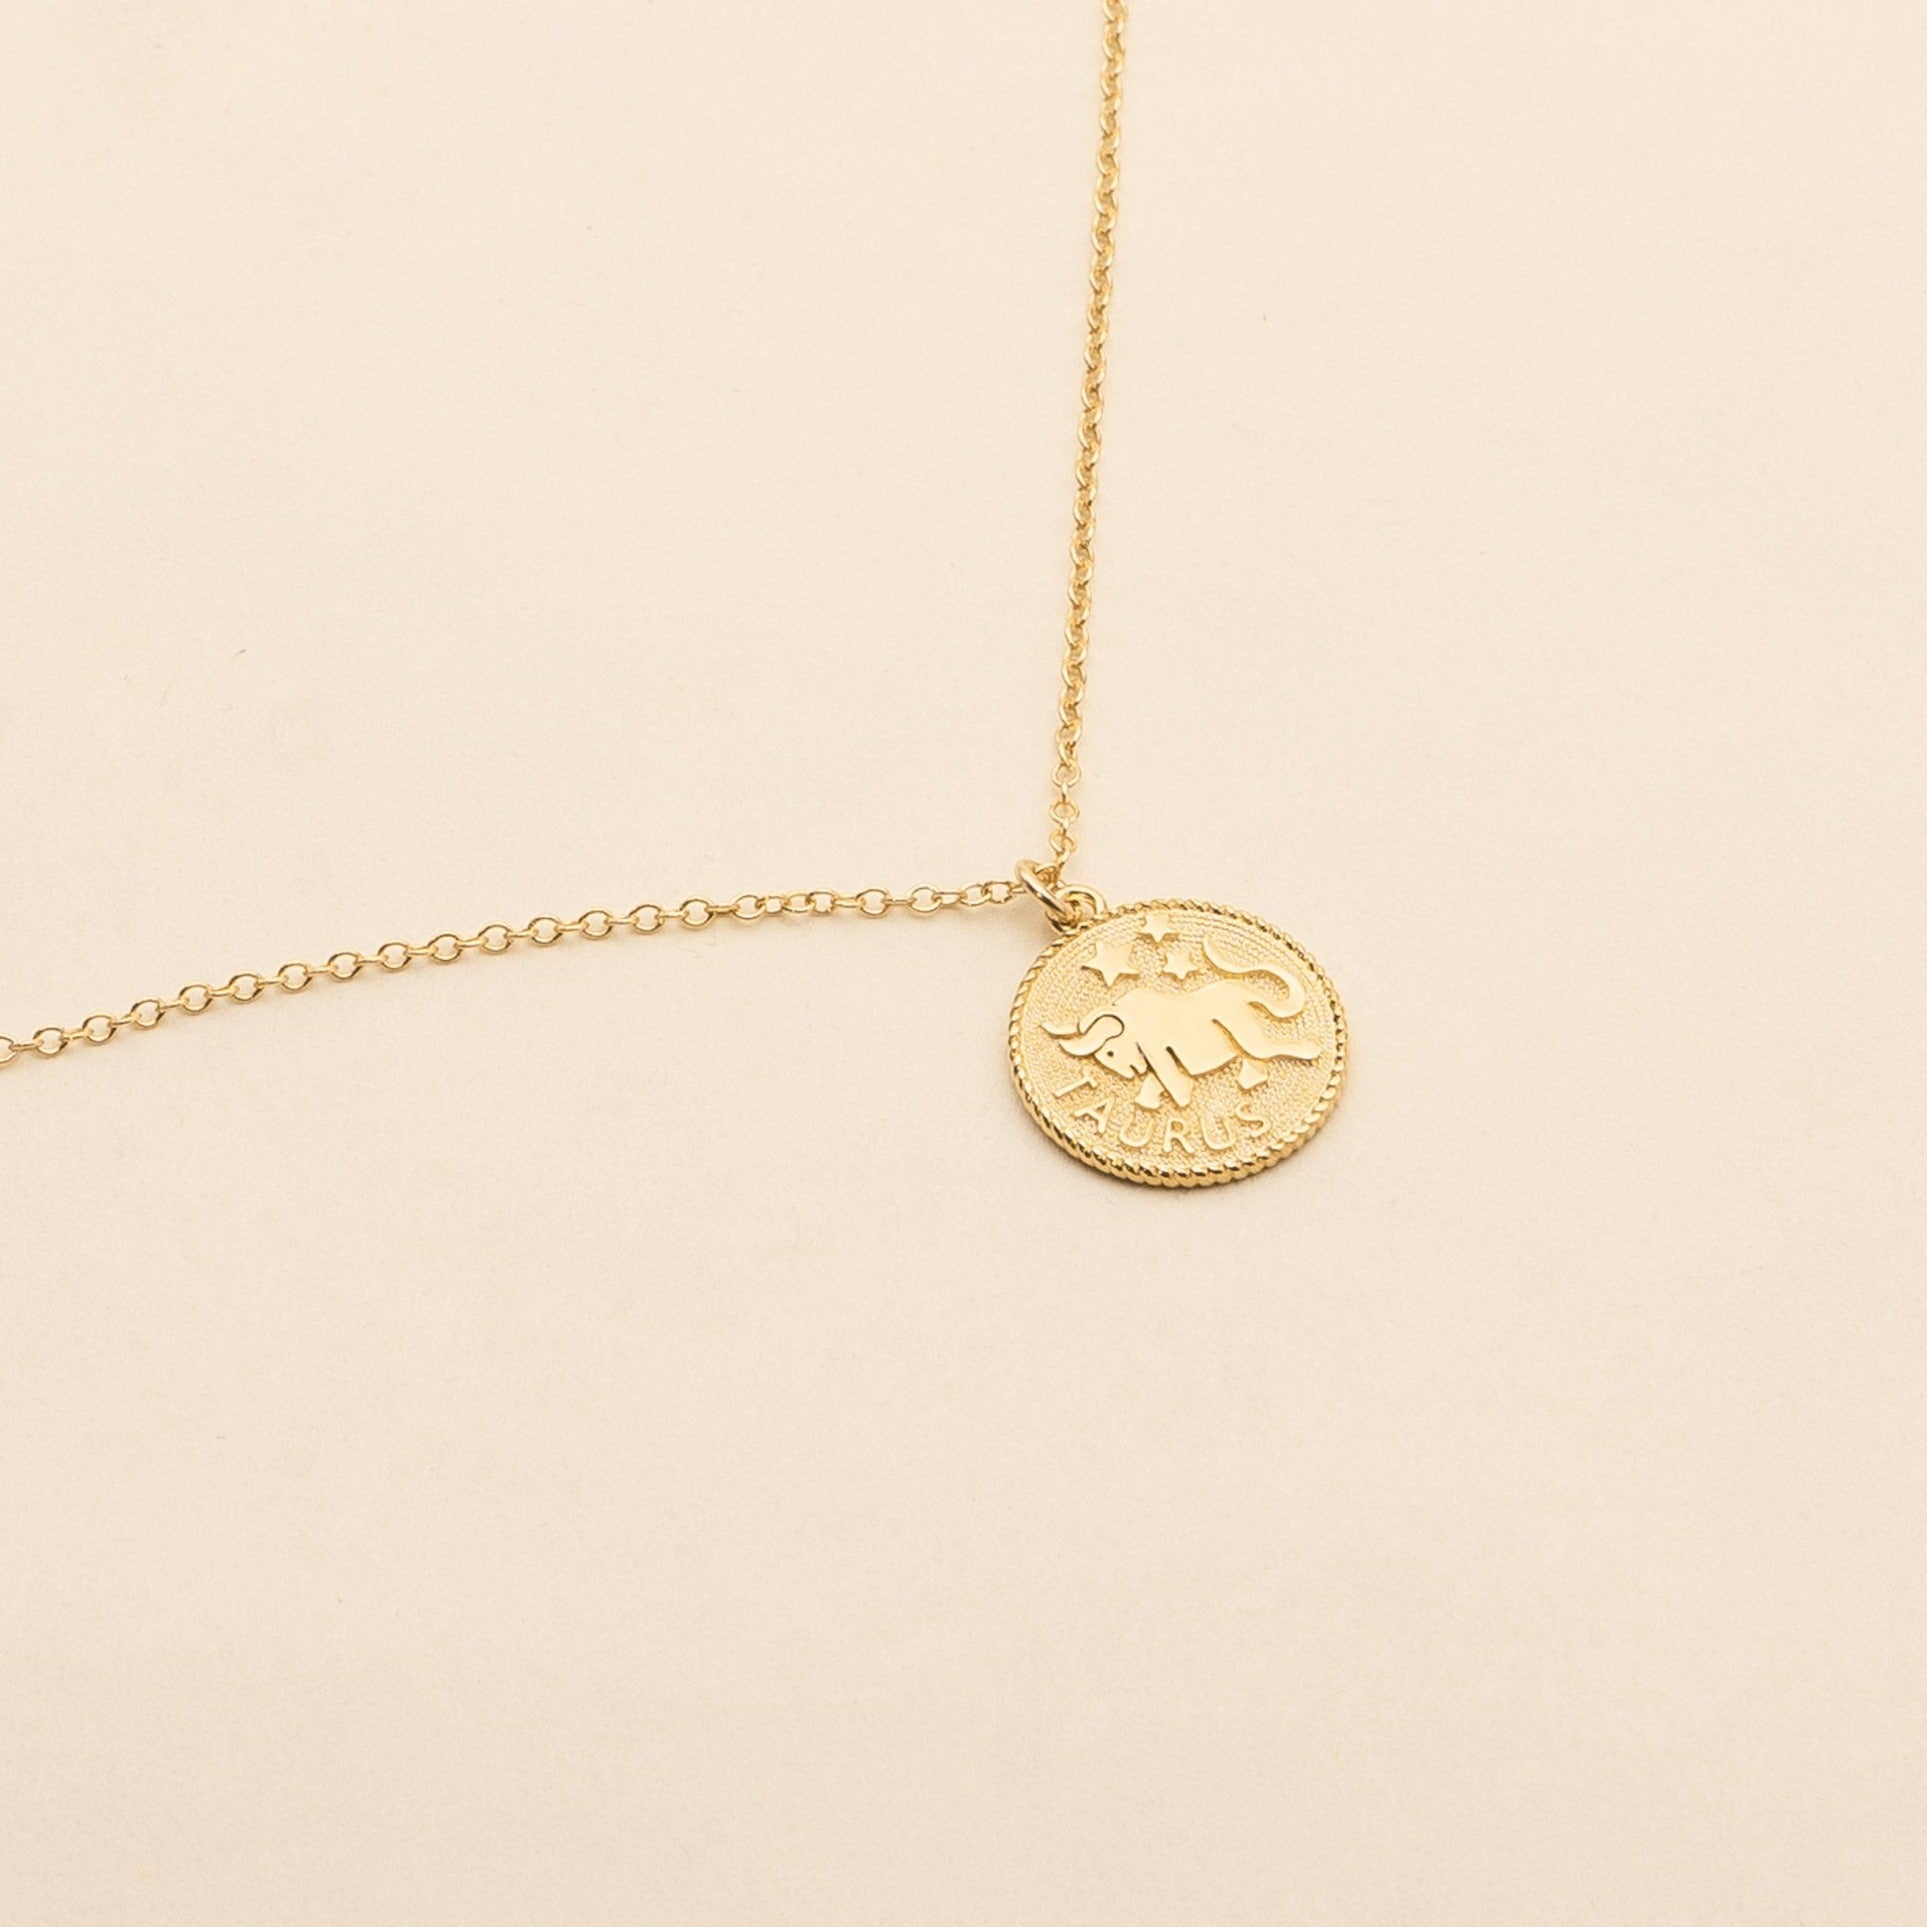 Taurus Zodiac Necklace lifestyle_Apr 21-May 20_Katie Dean Jewelry_horoscope sign_Zodiac Collection, dainty handmade necklaces by Katie Dean Jewelry